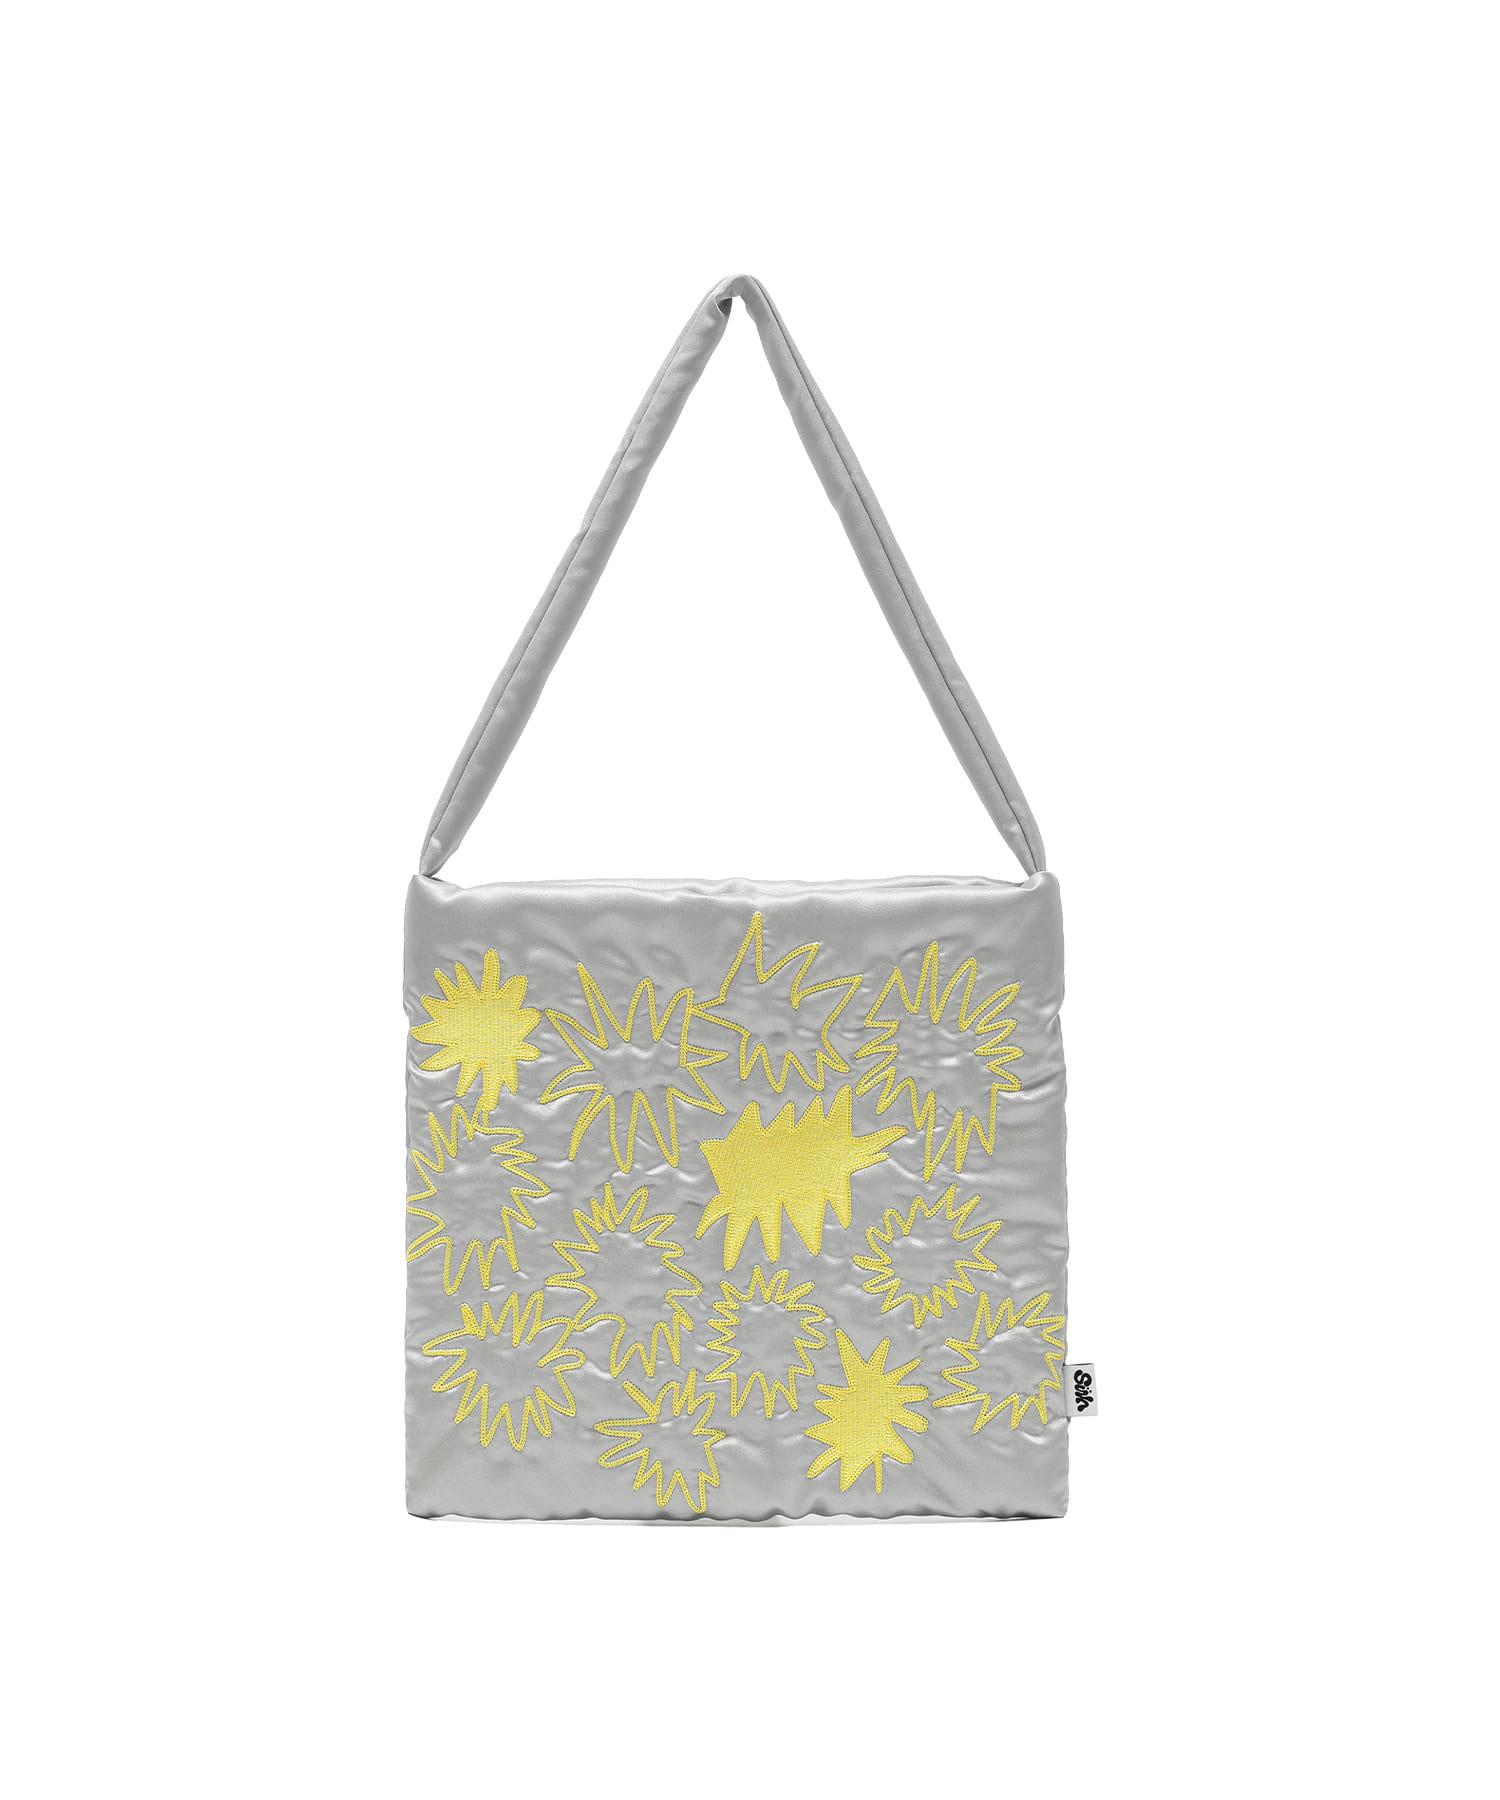 SPARKLE PADDED TOTE BAG[SILVER]